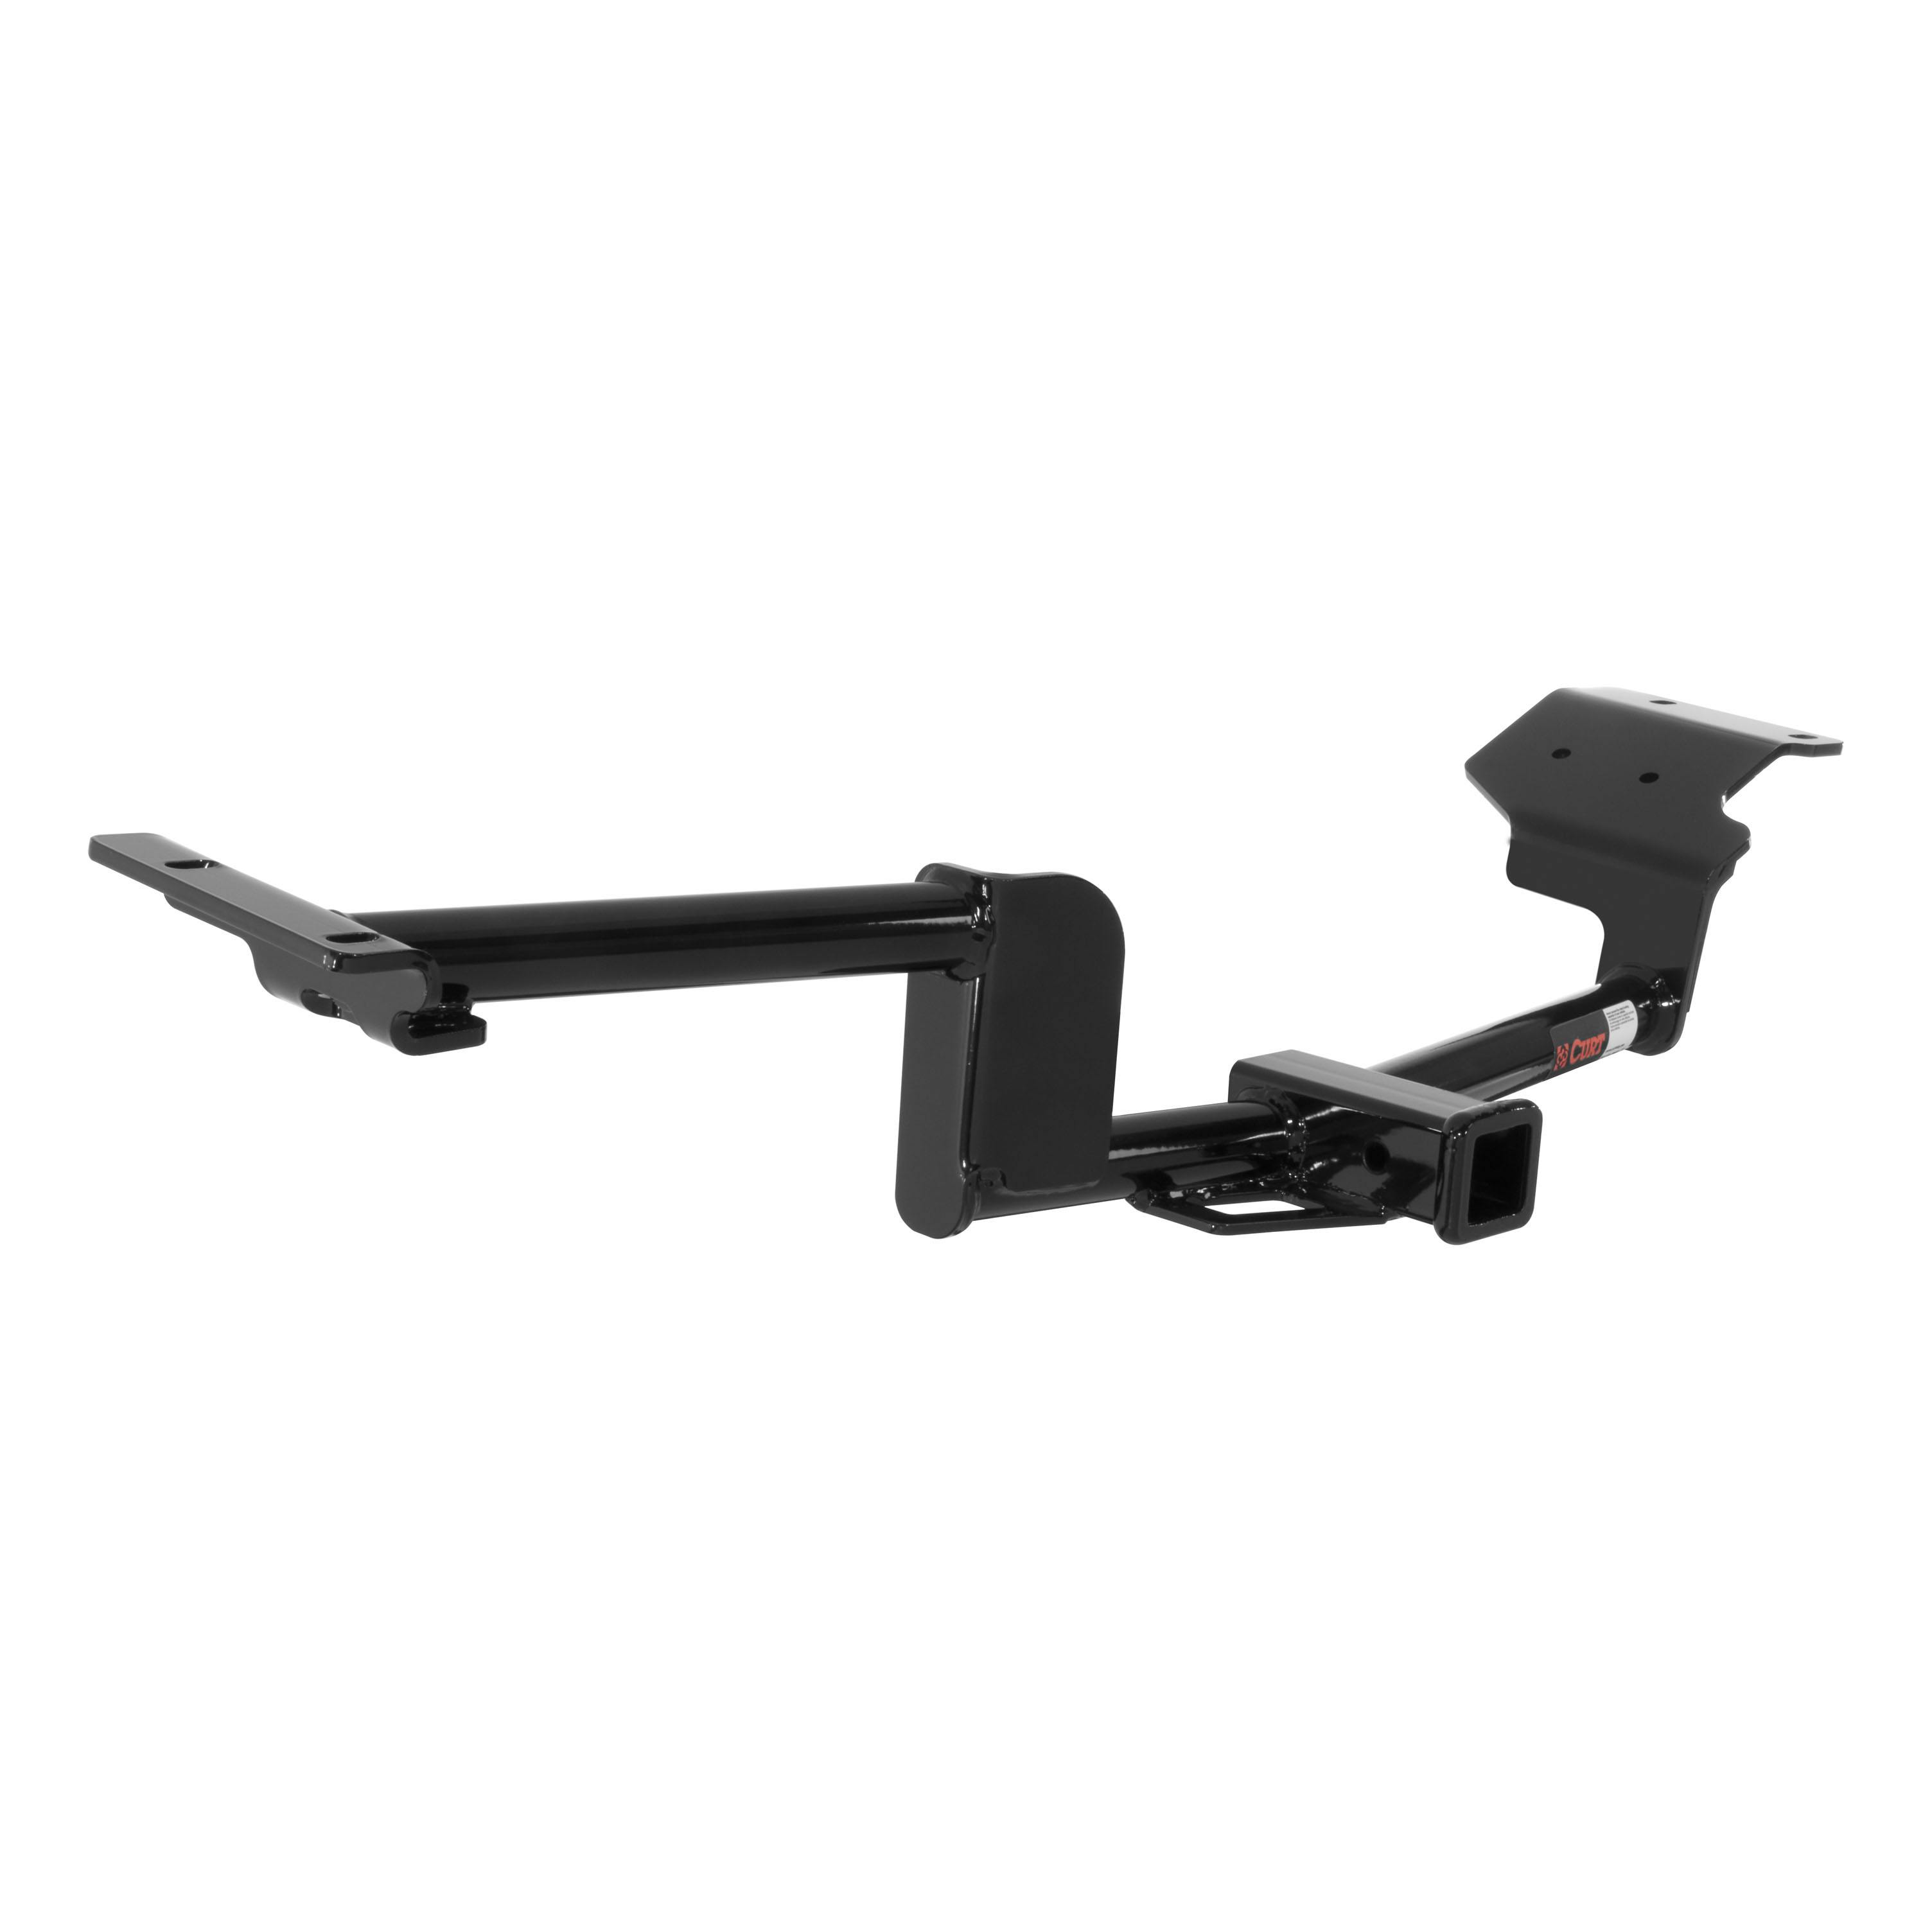 2-Inch Receiver for Select Ford Flex CURT 13551 Class 3 Trailer Hitch